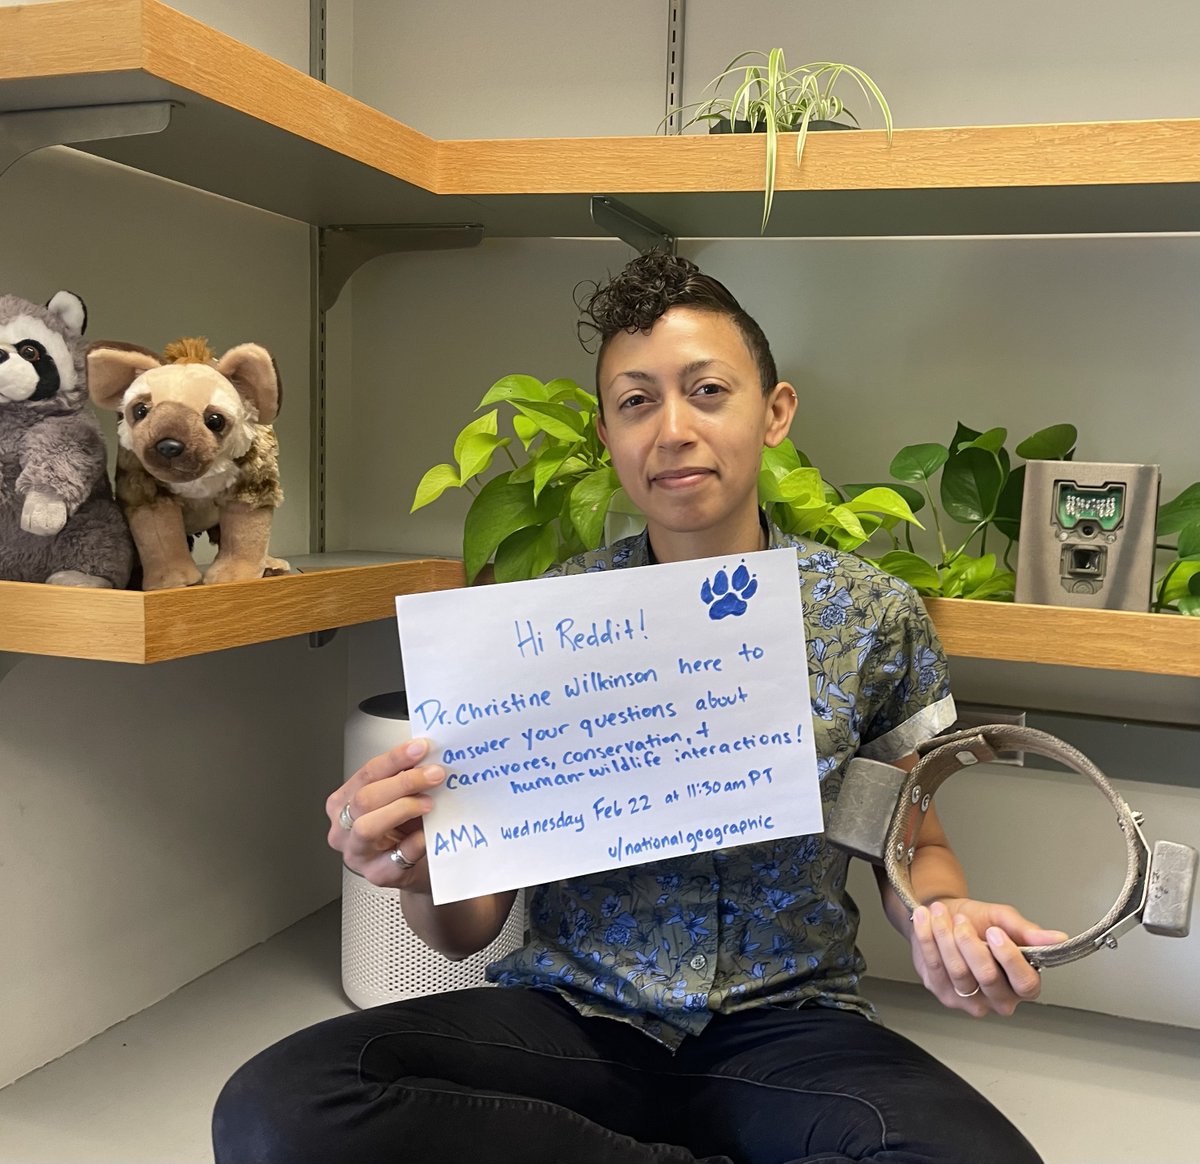 Doing a @Reddit AMA with @NatGeo next Wednesday Feb 22 at 11:30am PT at r/AskScience. Ask me anything about carnivores, conservation, human-wildlife interactions, #SciComm, & advocacy!

@InsideNatGeo #ScienceTwitter #AMA #RedditAMA